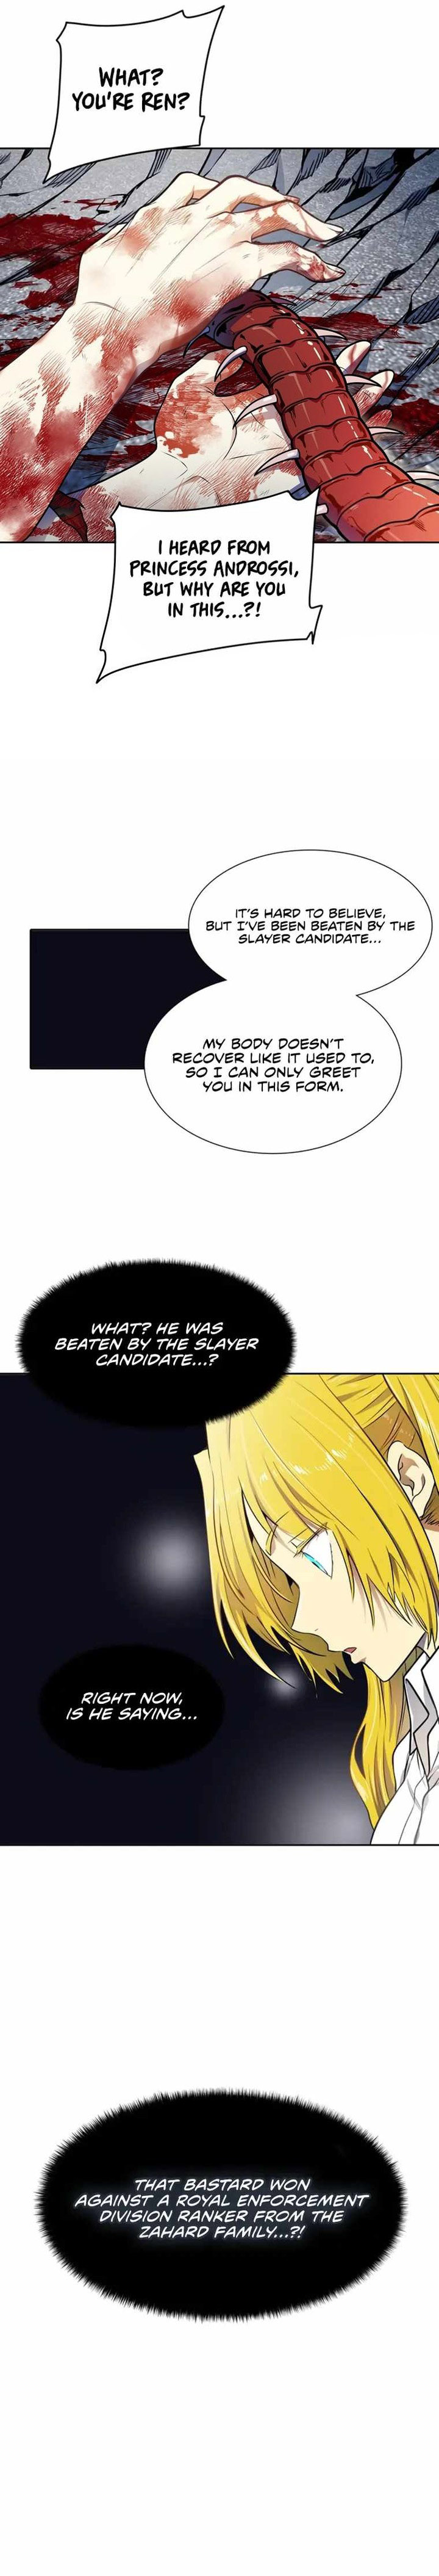 Tower Of God 567 17